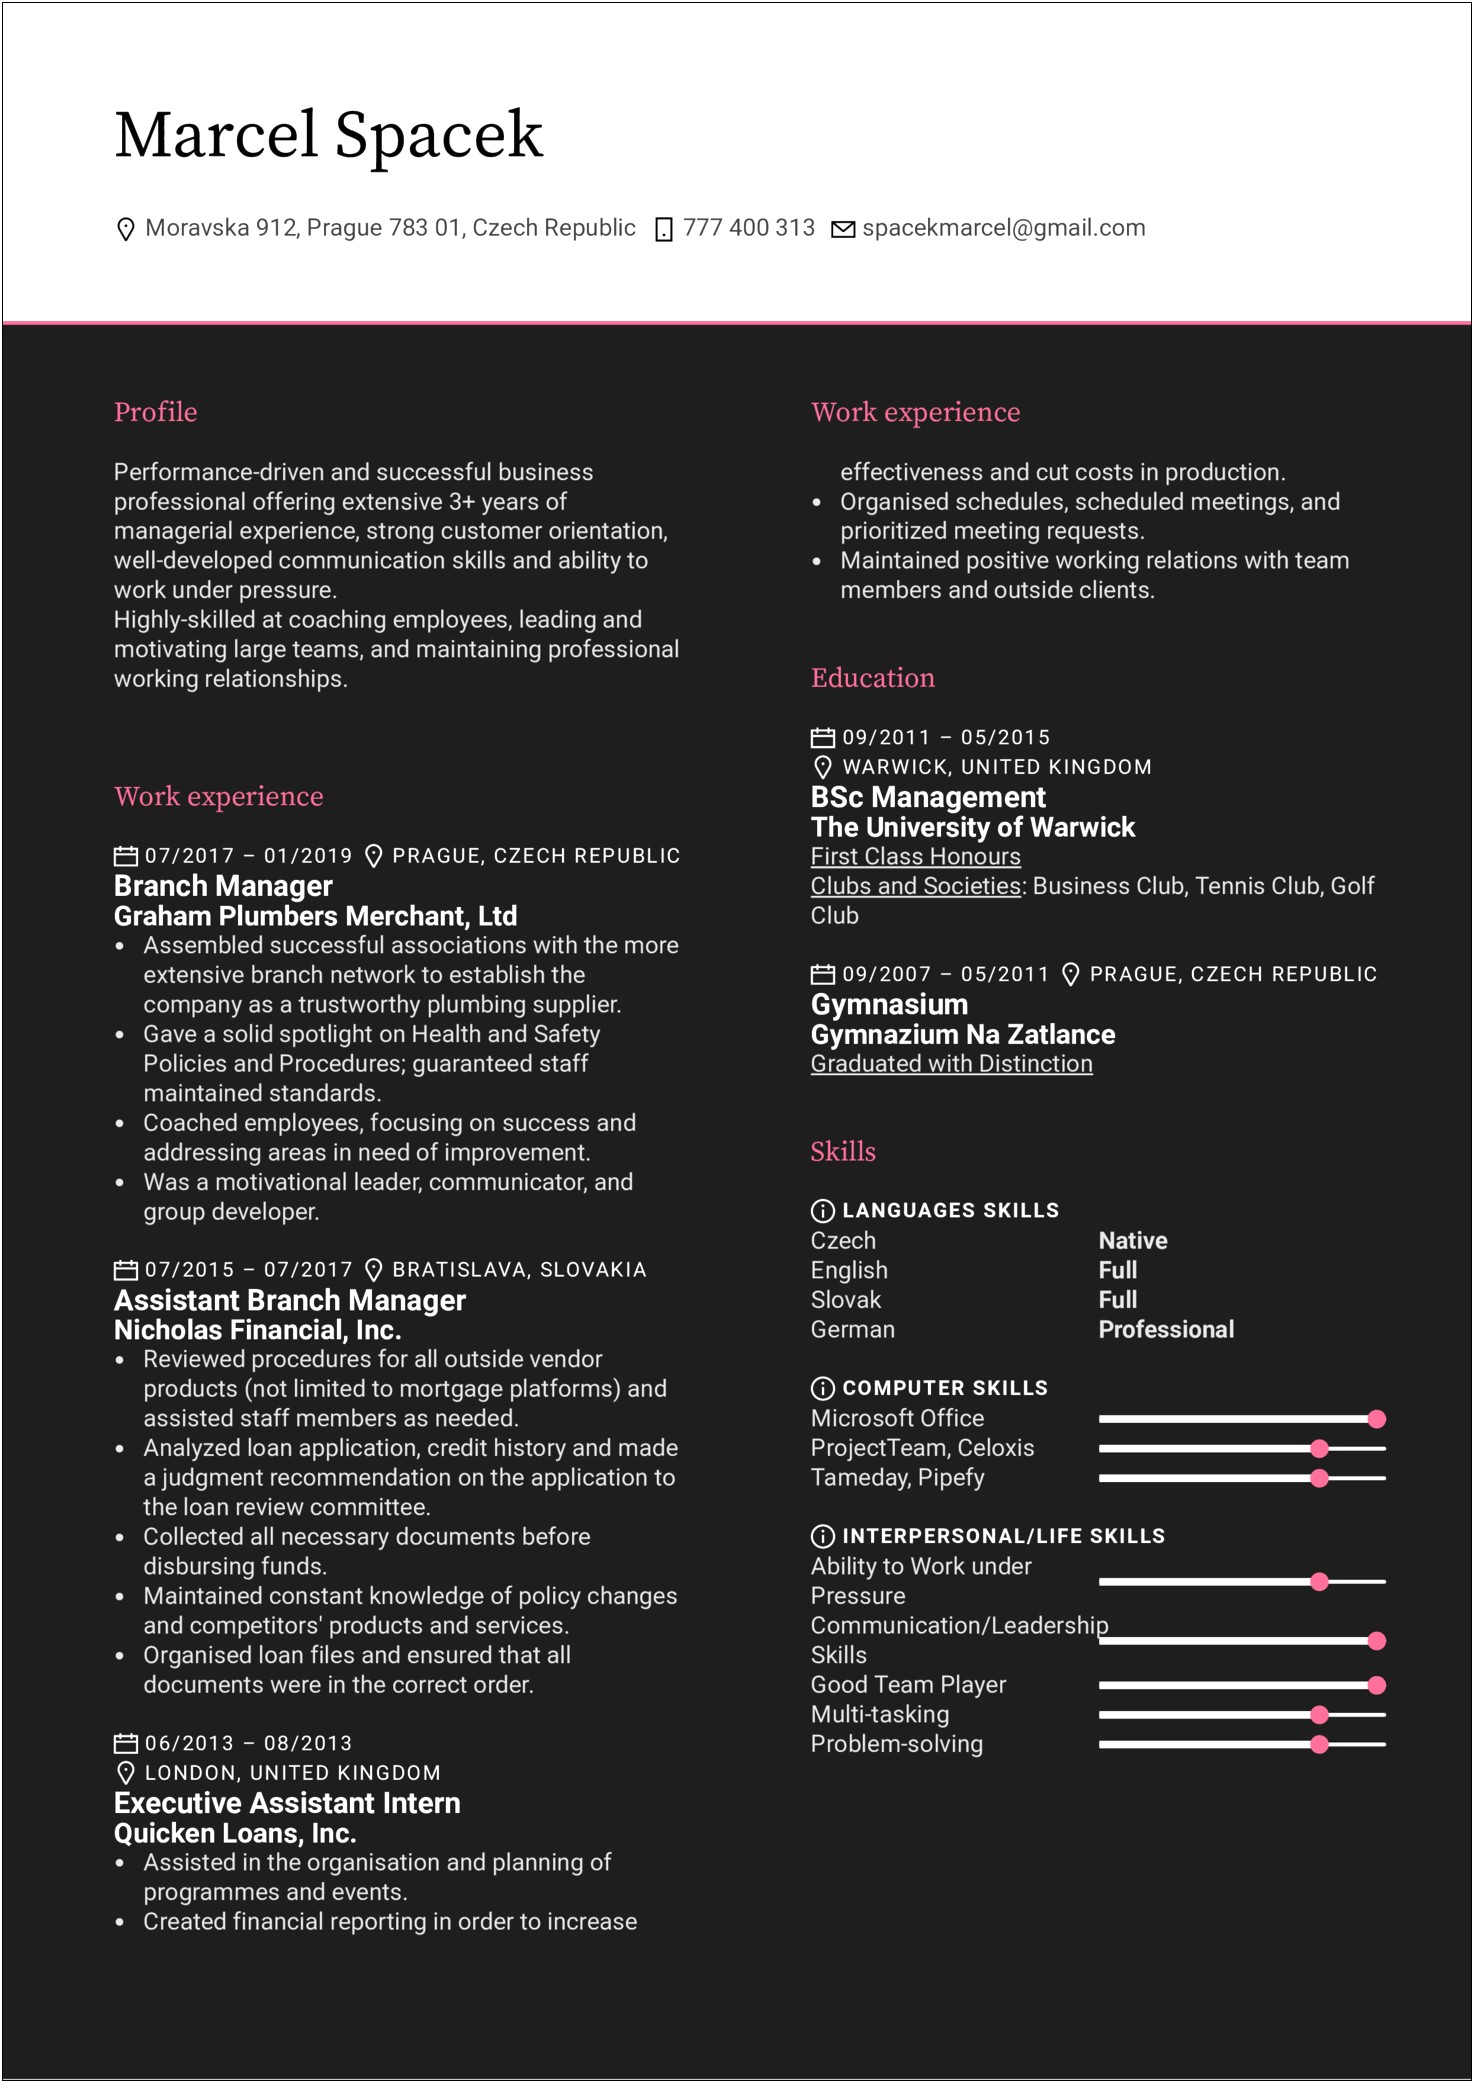 Restaurant Assistant Manager Resume Highlights Templates